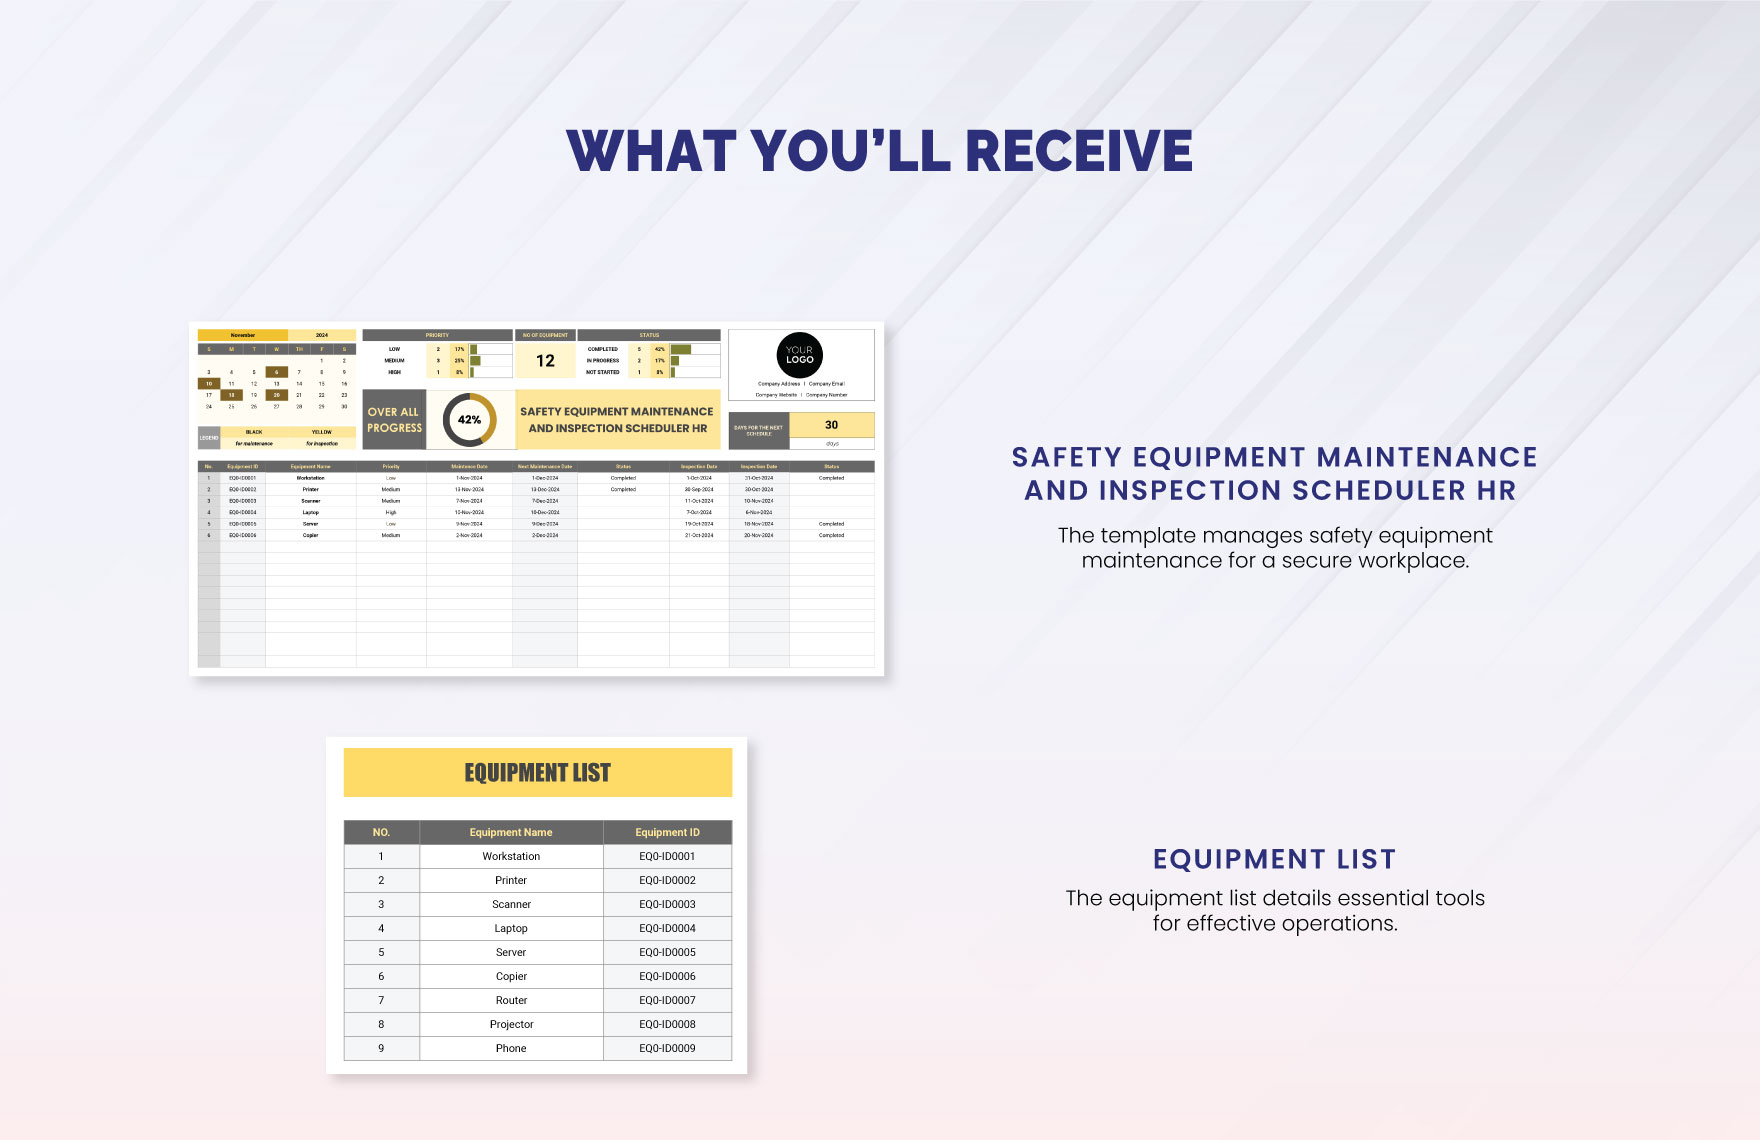 Safety Equipment Maintenance and Inspection Scheduler HR Template